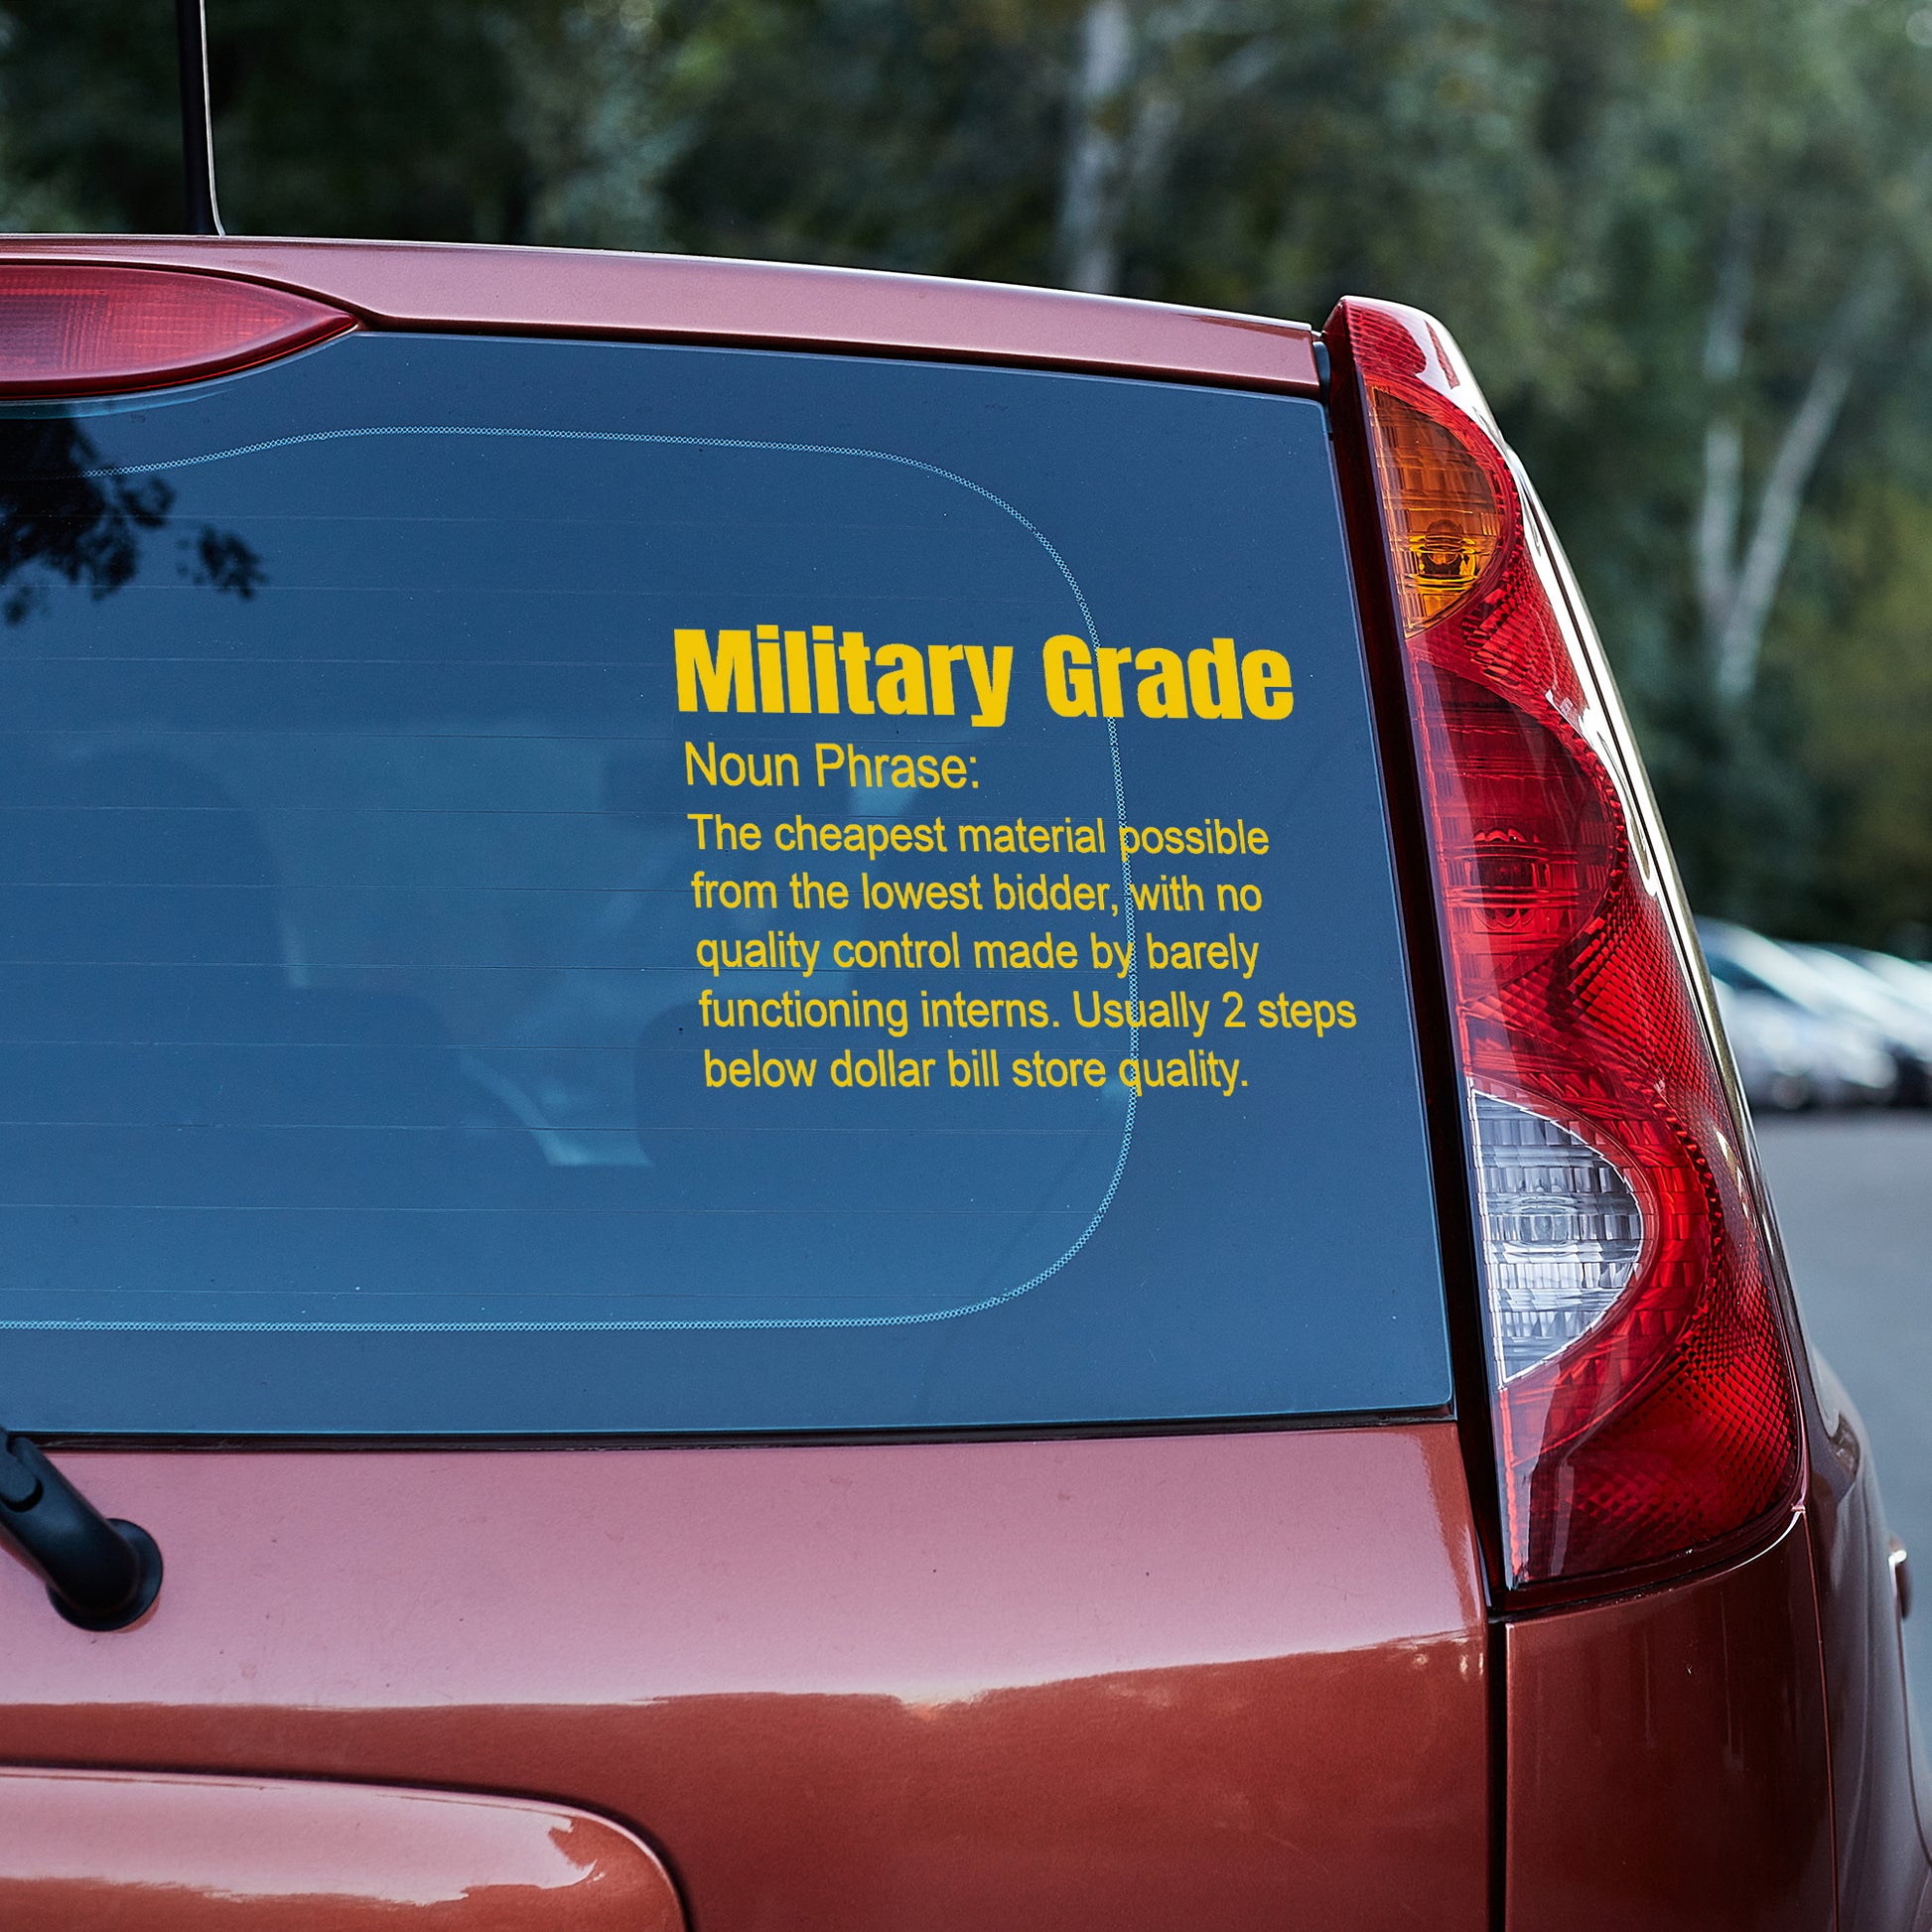 Military grade, it's not the flex you think it is vinyl decal adult beverage decal stickers Decals for cars Decals for Trucks minivan sticker Potato vodka SUV decals truck decals window decal car Window decals window decor